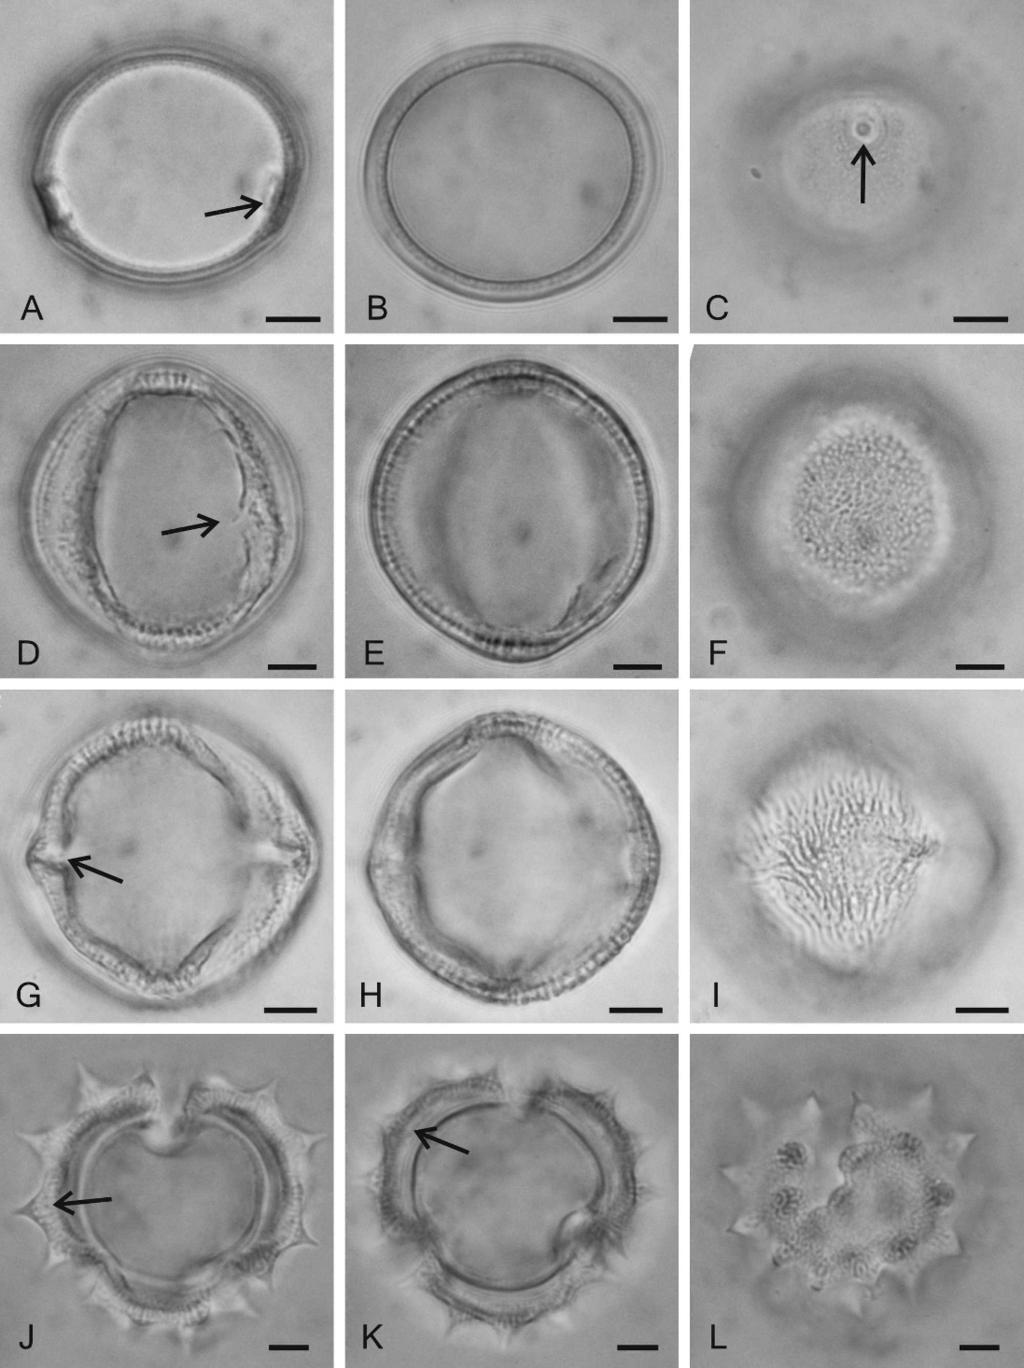 2007] PALAZZESI ET AL.: POLLEN OF SOUTH AMERICAN SPECIES 529 FIG. 1. LM photomicrographs of the selected species of this study: (A C) Equatorial view of Celtis tala. A. High focus showing circular ora (arrow).